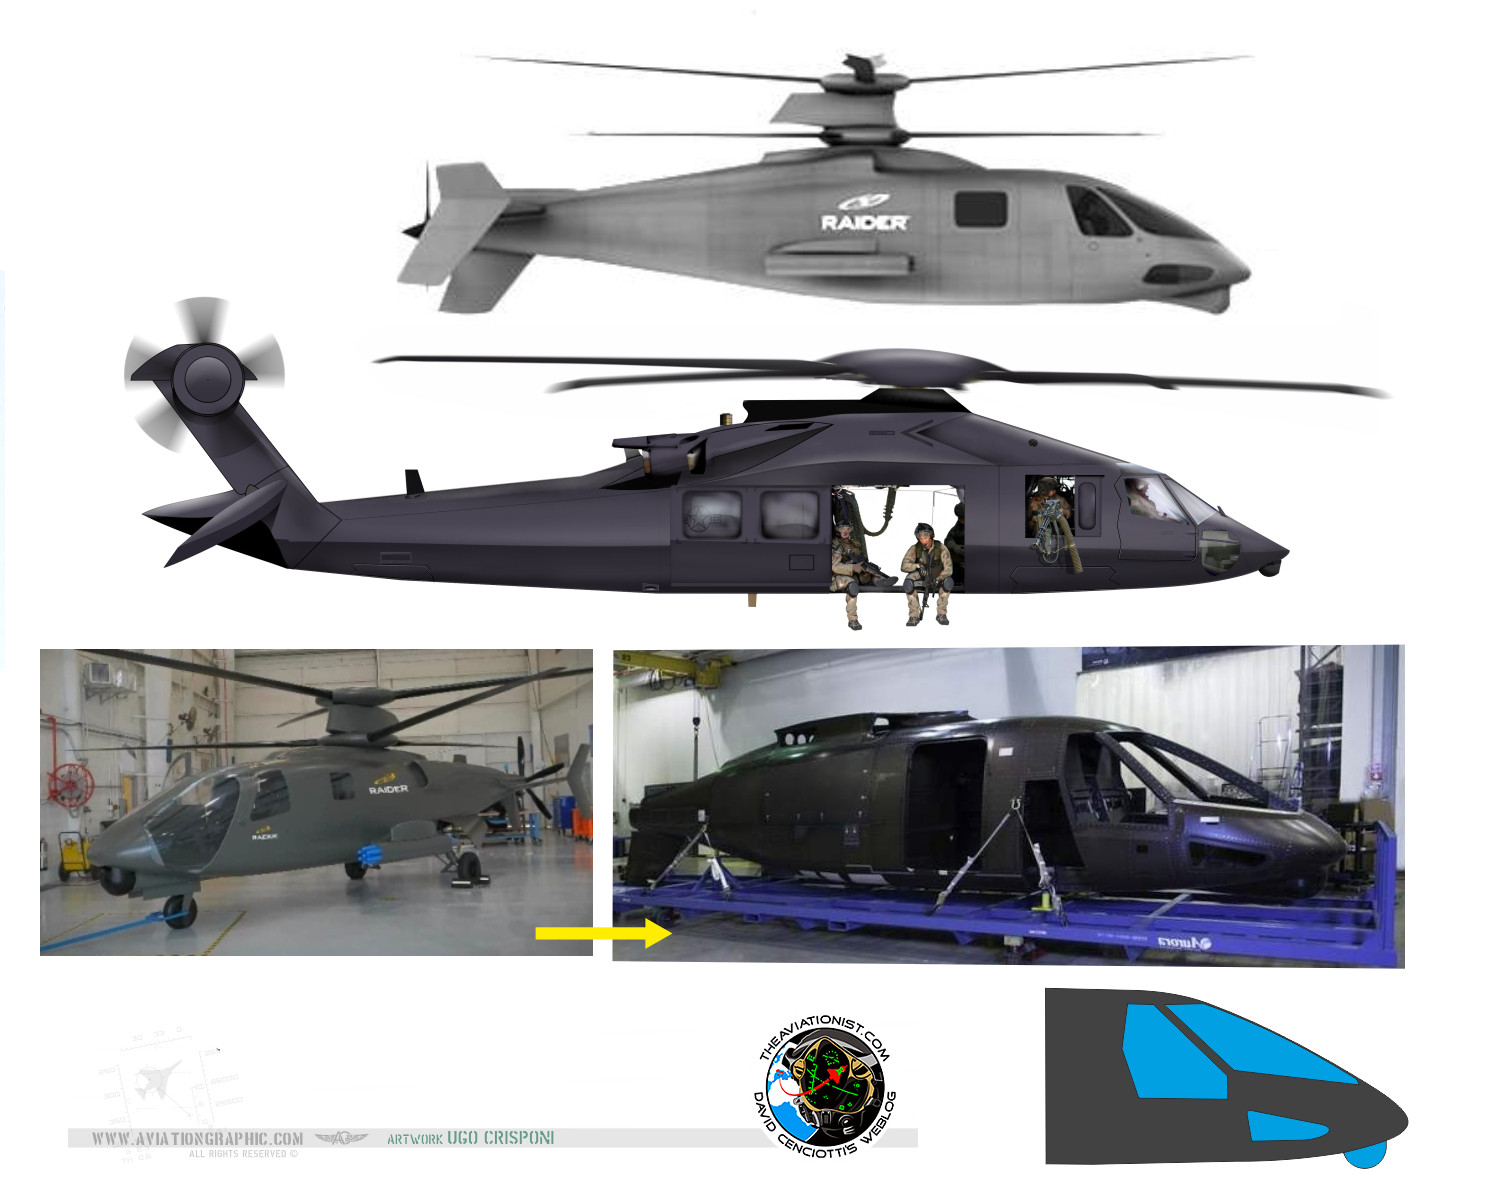 MIRAGEC14: New Sikorsky S-97 Raider similar to the mysterious Stealth “Osama Bin ...1500 x 1200